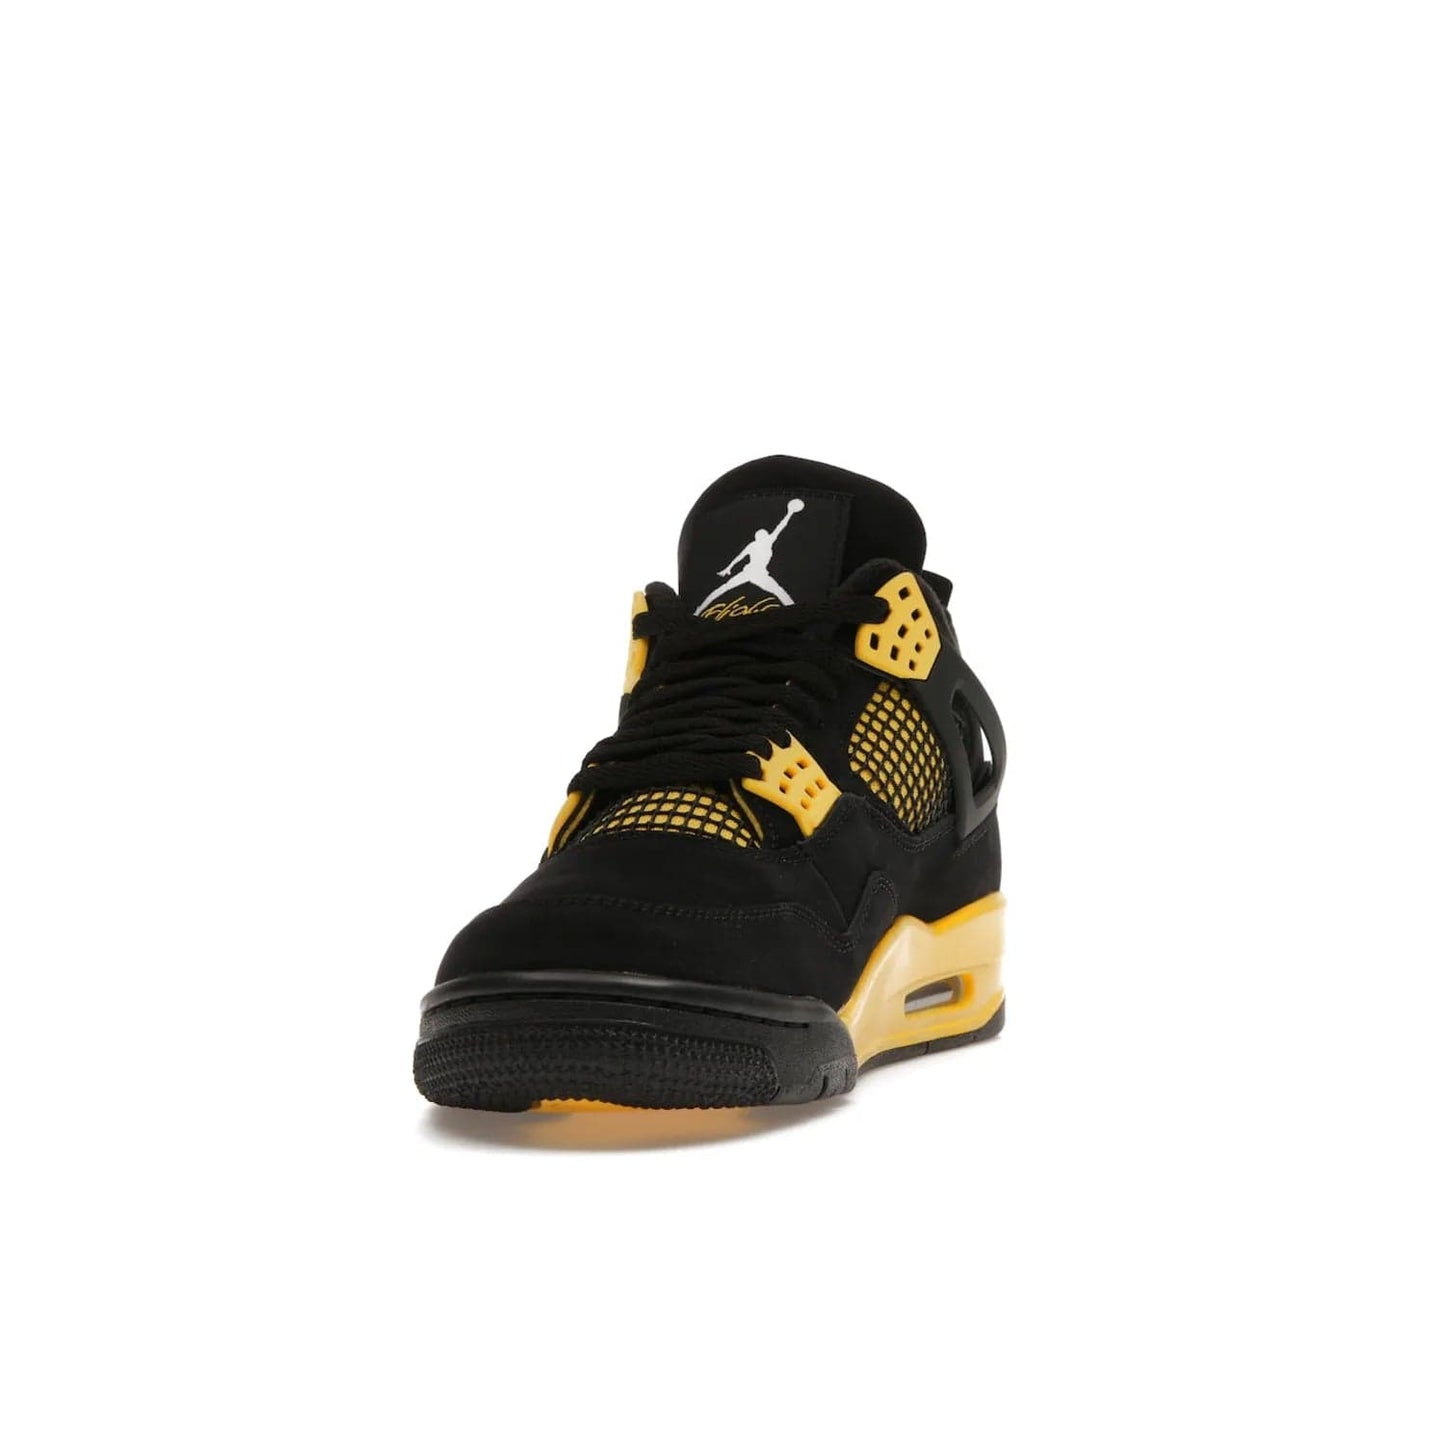 Jordan 4 Retro Thunder (2023) - Image 12 - Only at www.BallersClubKickz.com - Iconic Air Jordan 4 Retro Thunder (2023) returns with black nubuck upper and Tour Yellow details. Featuring Jumpman logo on heel tab, tongue and insoles. Dropping May 13th, 2023.